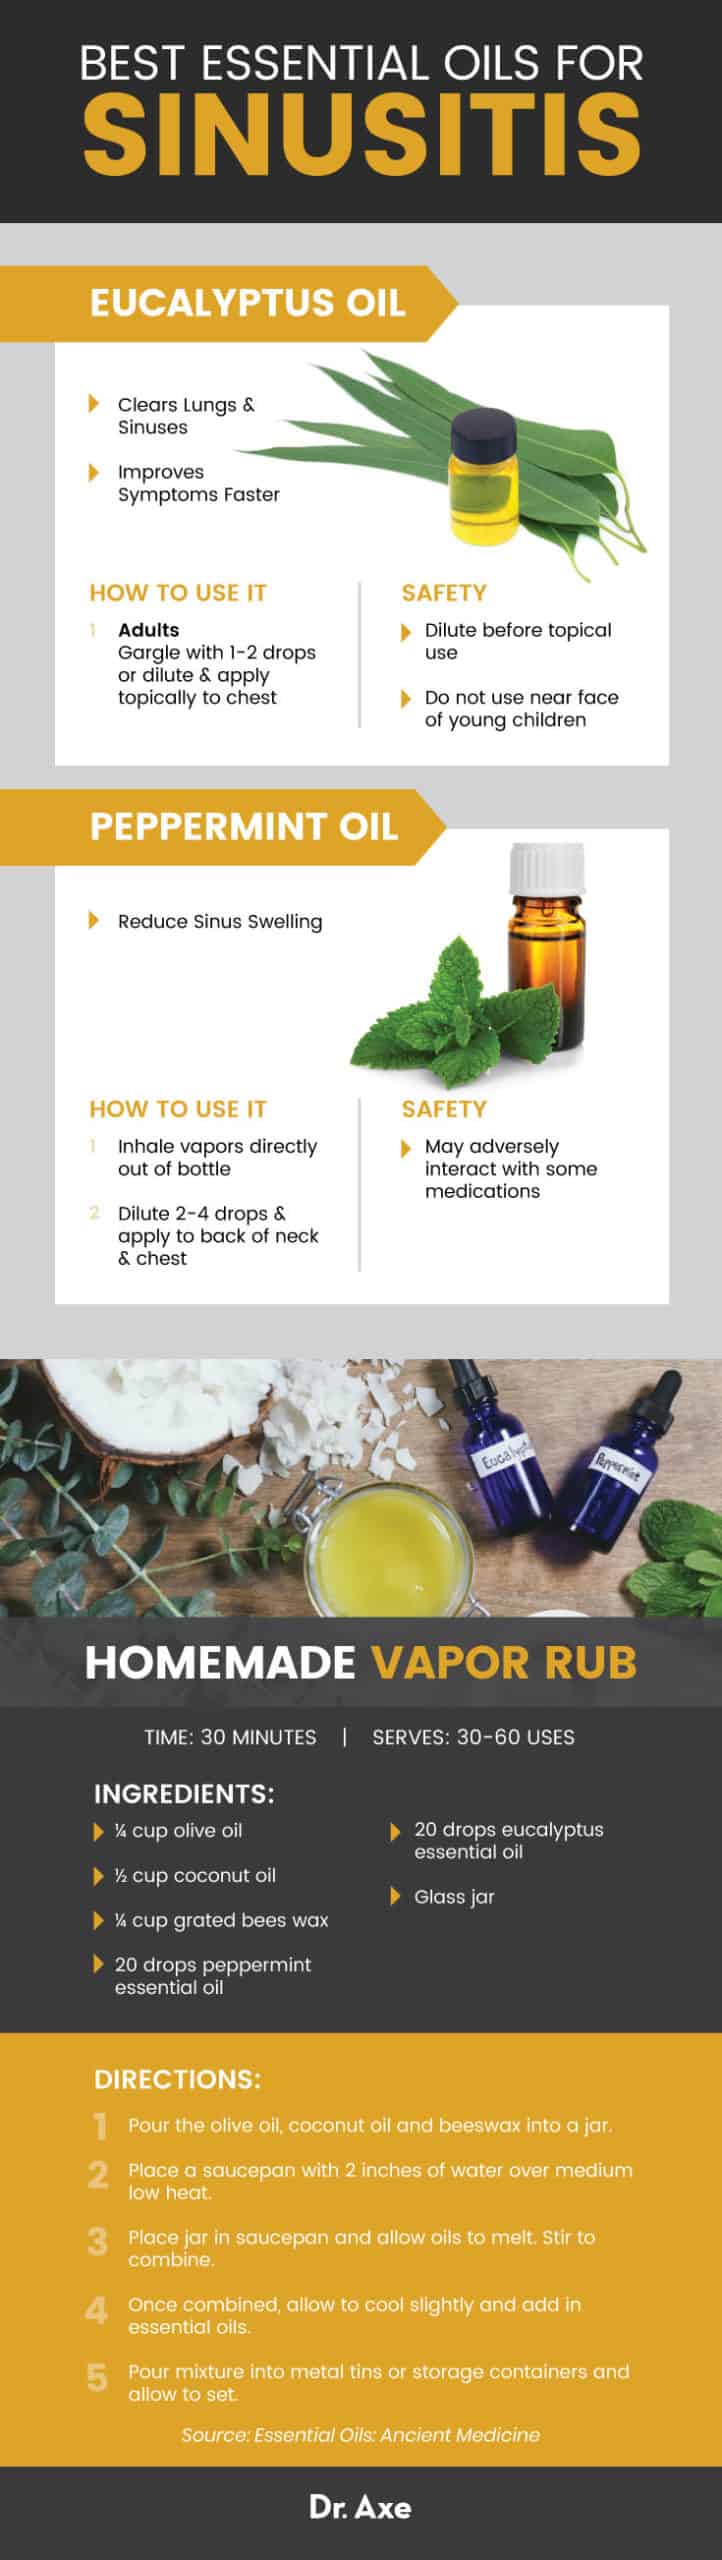 Essential oils for colds and sinusitis - Dr. Axe